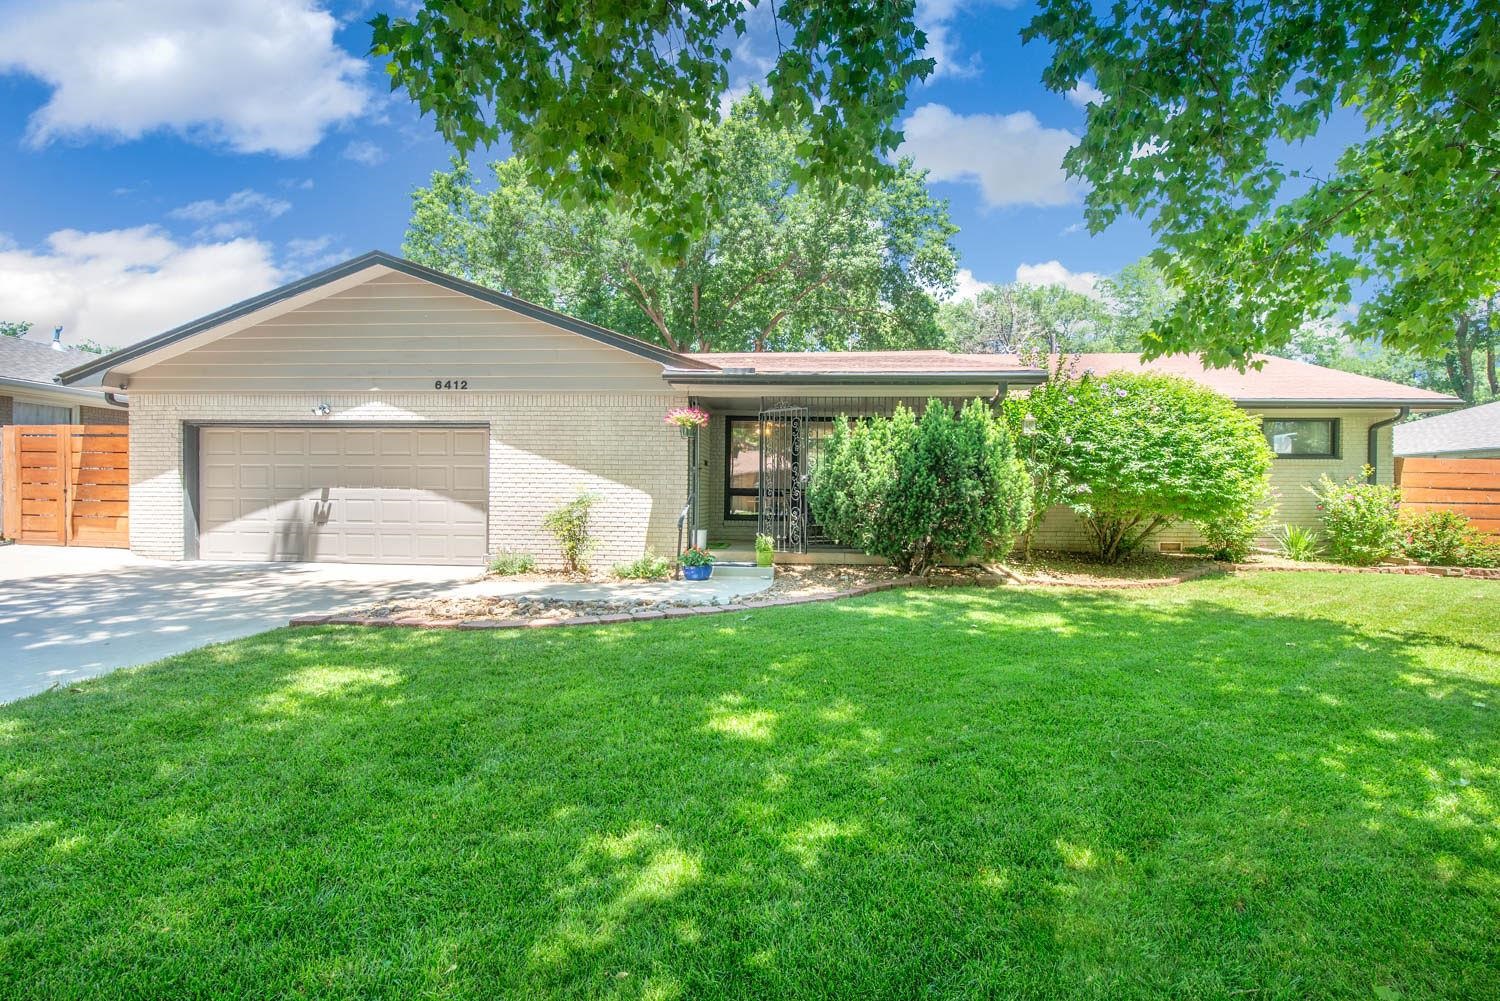 This home is located in the heart of East Wichita. Updated with a huge backyard that is great for ki